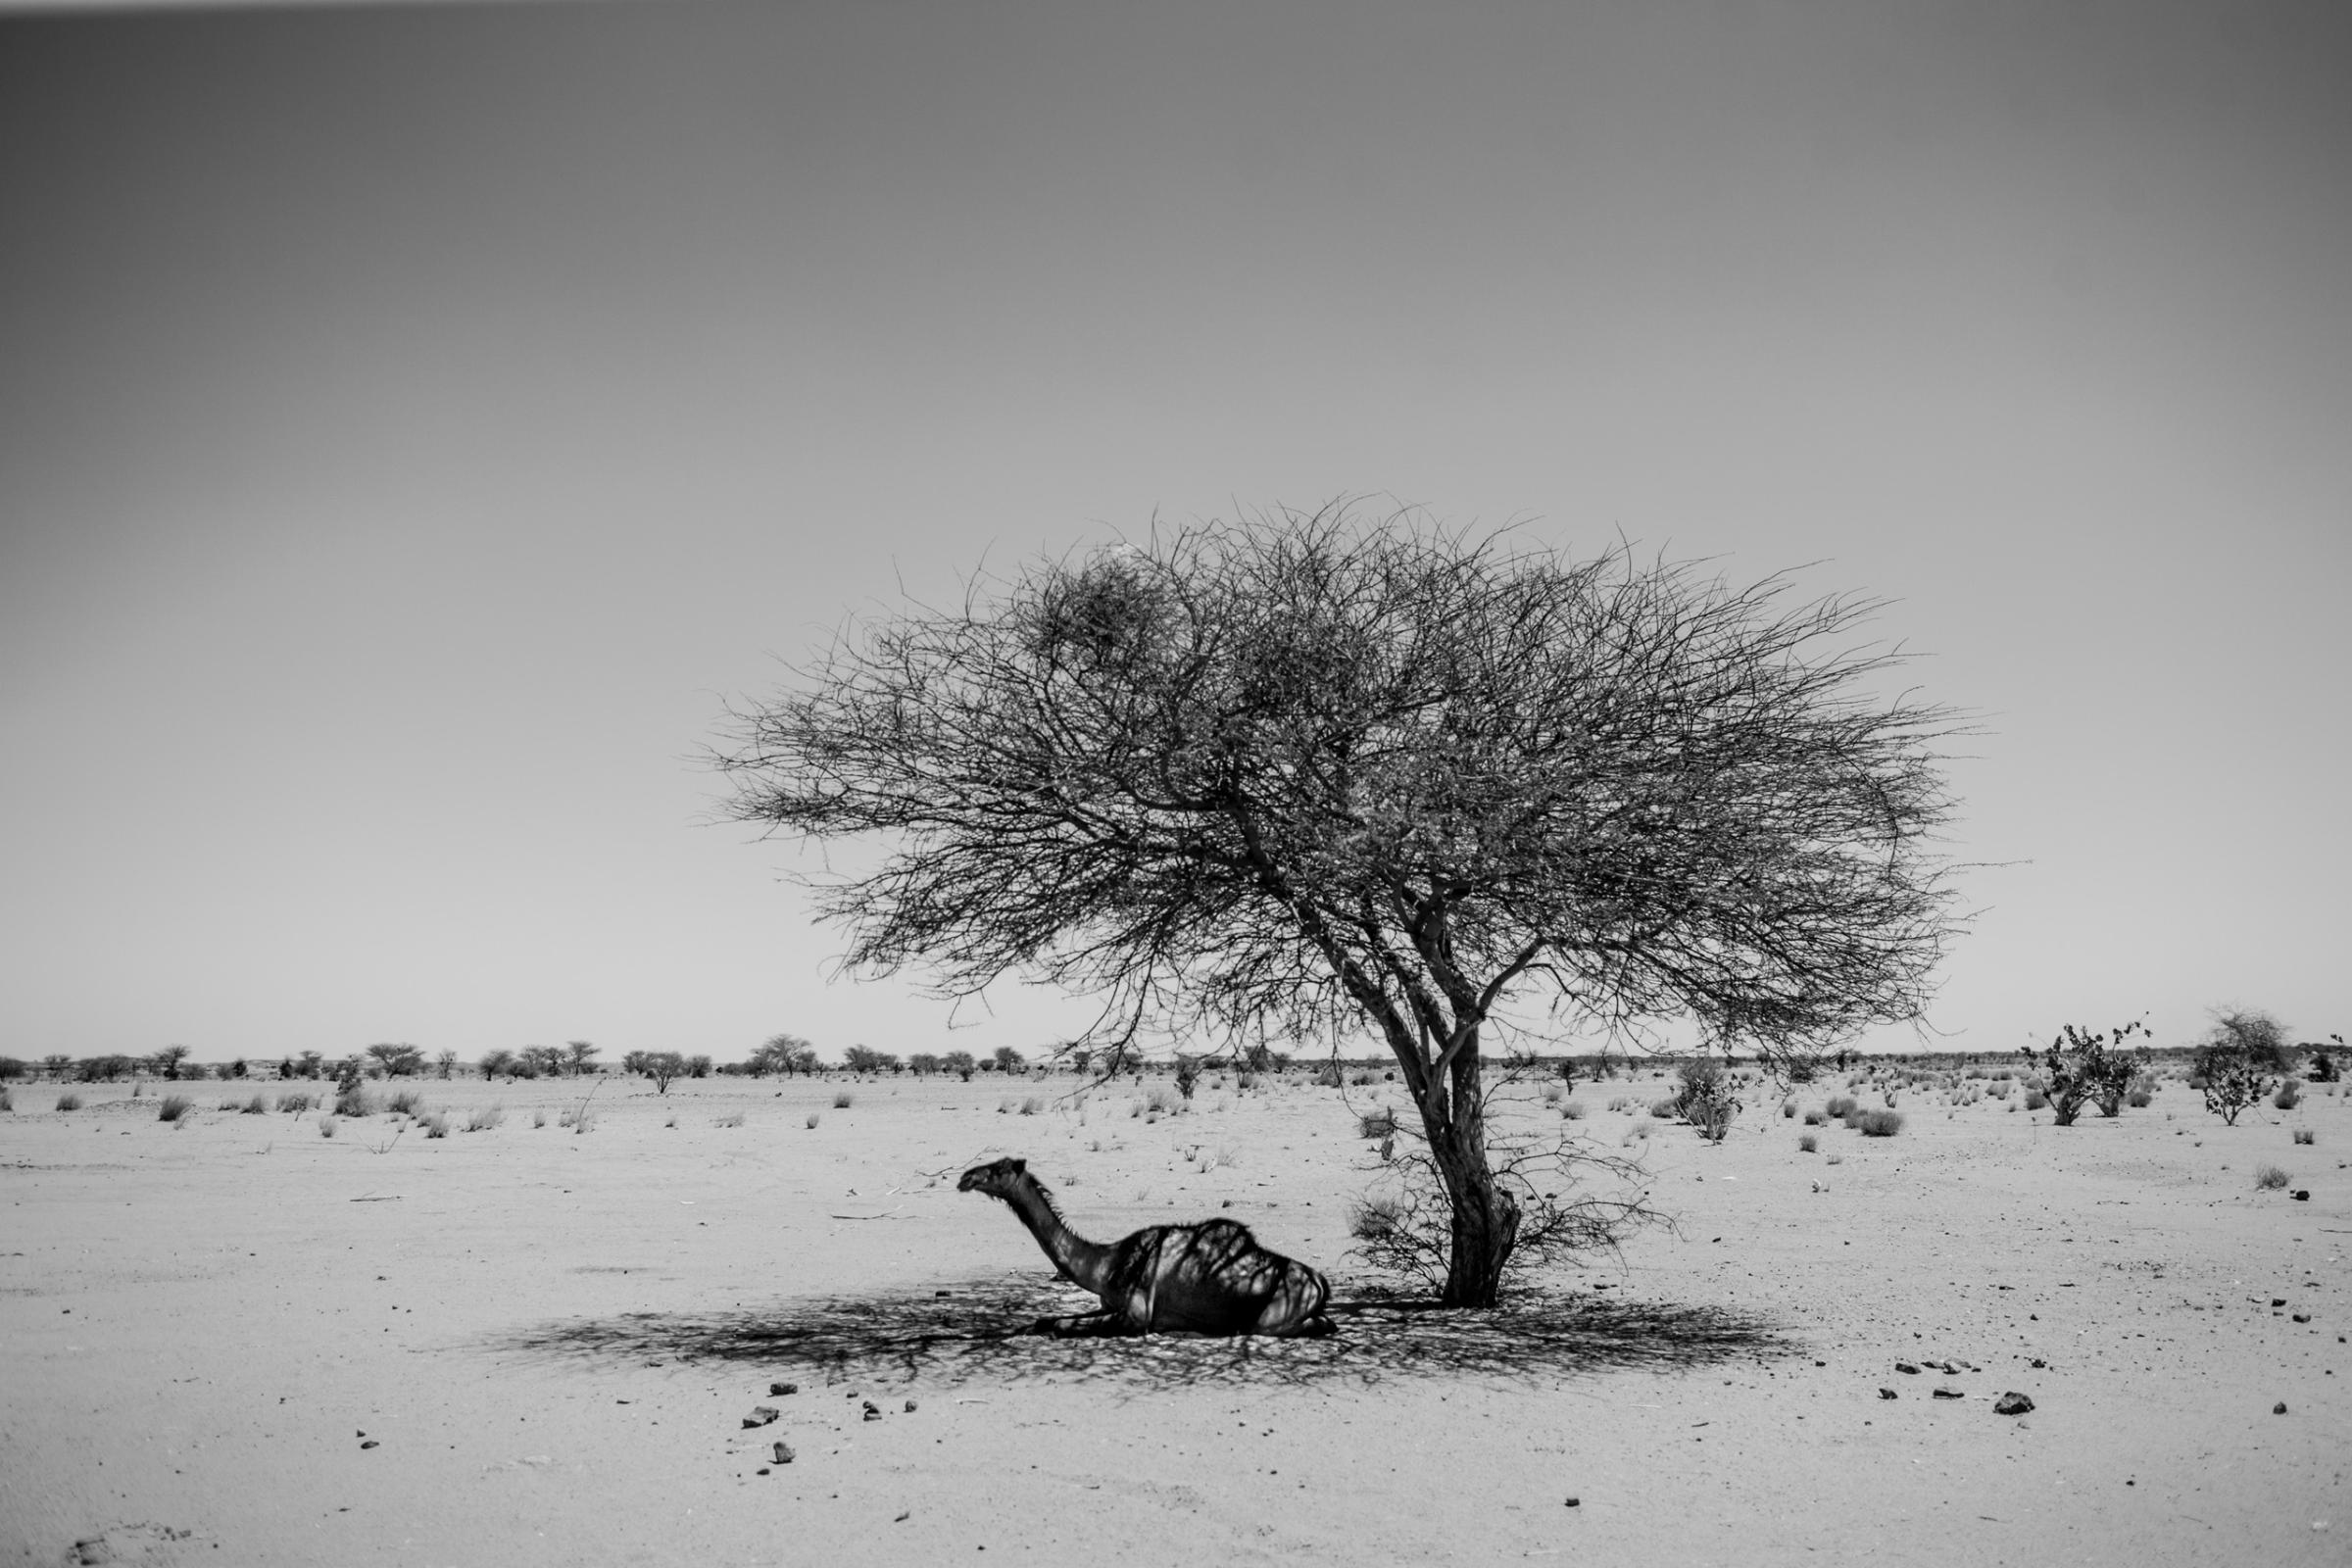 A camel rests under a tree in the desert north of Agadez, Niger. Temperatures in the Sahara easily rise to 110 F during the day and plummet to the low 50s at night.